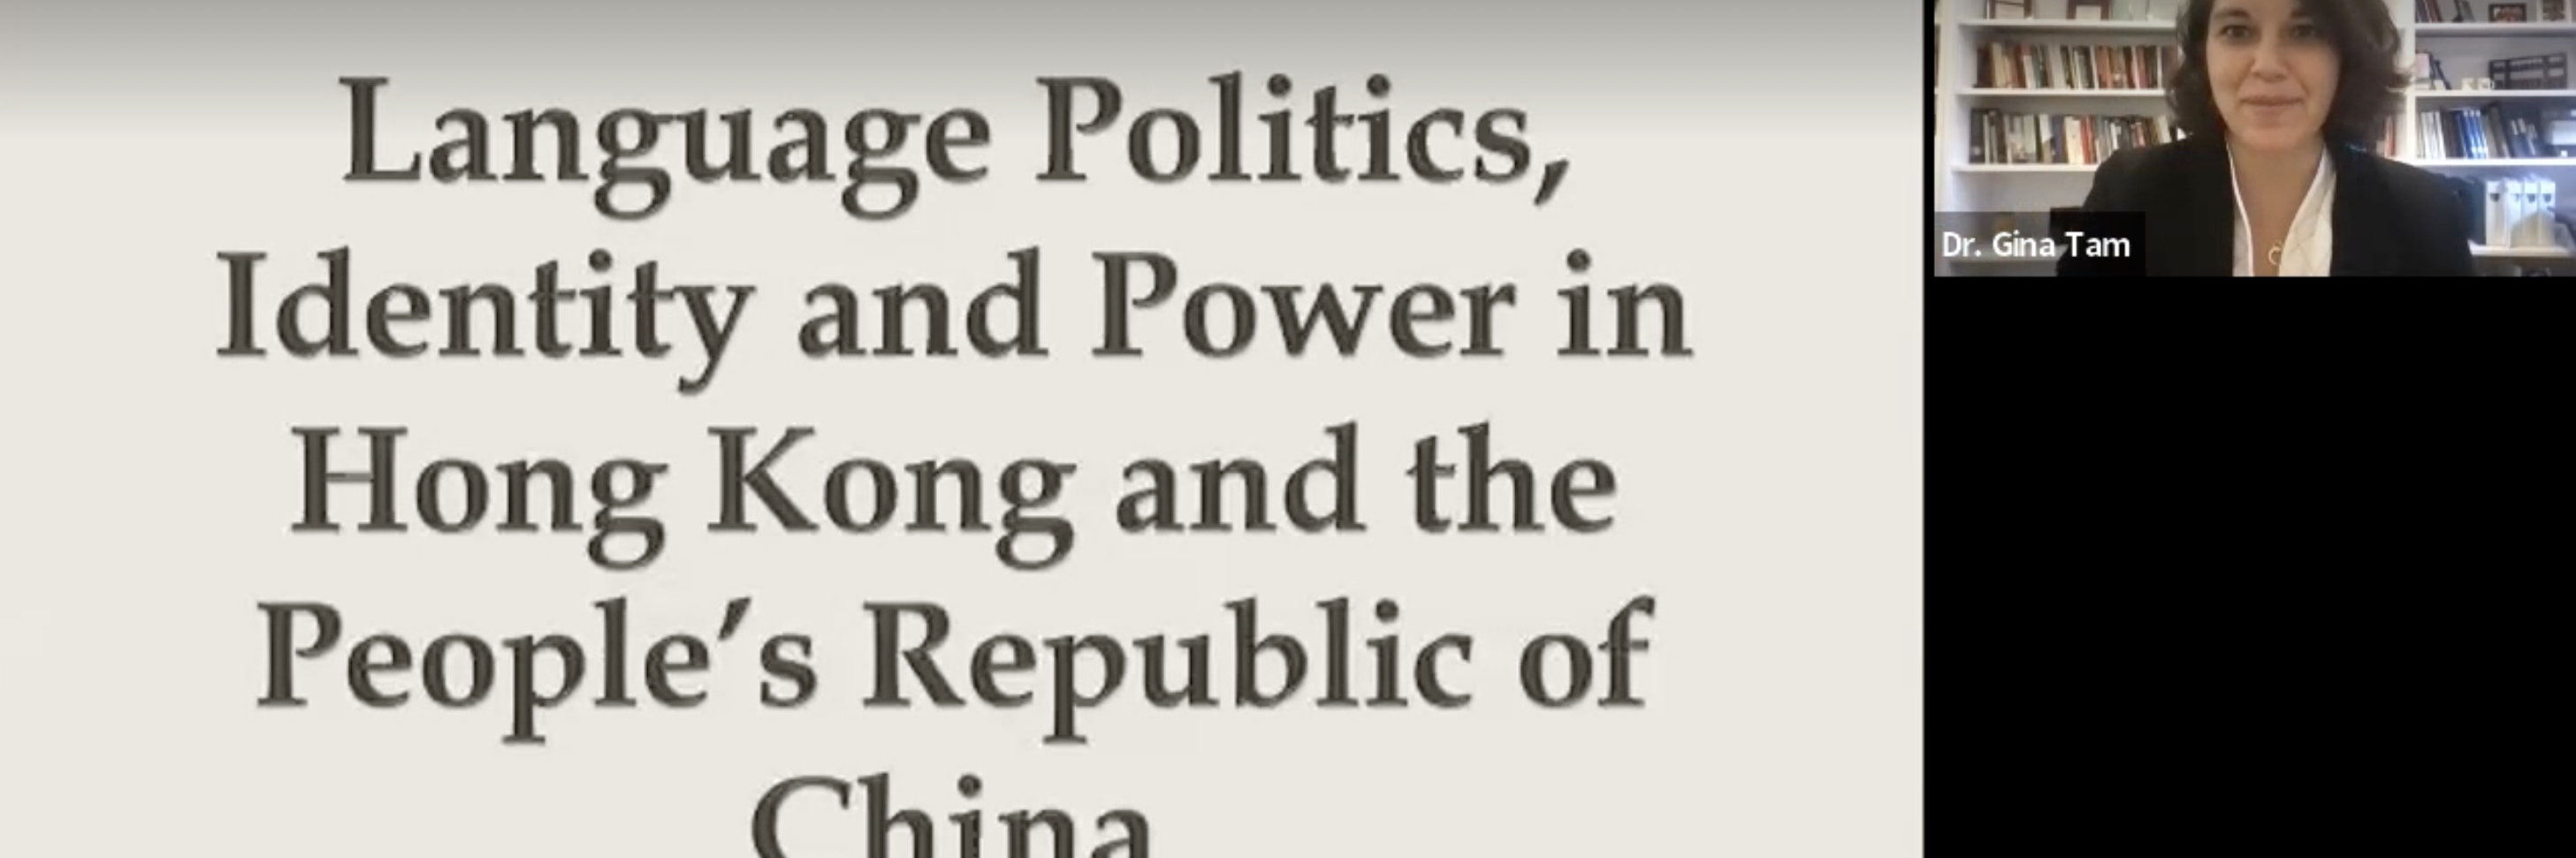 Language Politics, Identity and Power in Hong Kong and the People's Republic of China